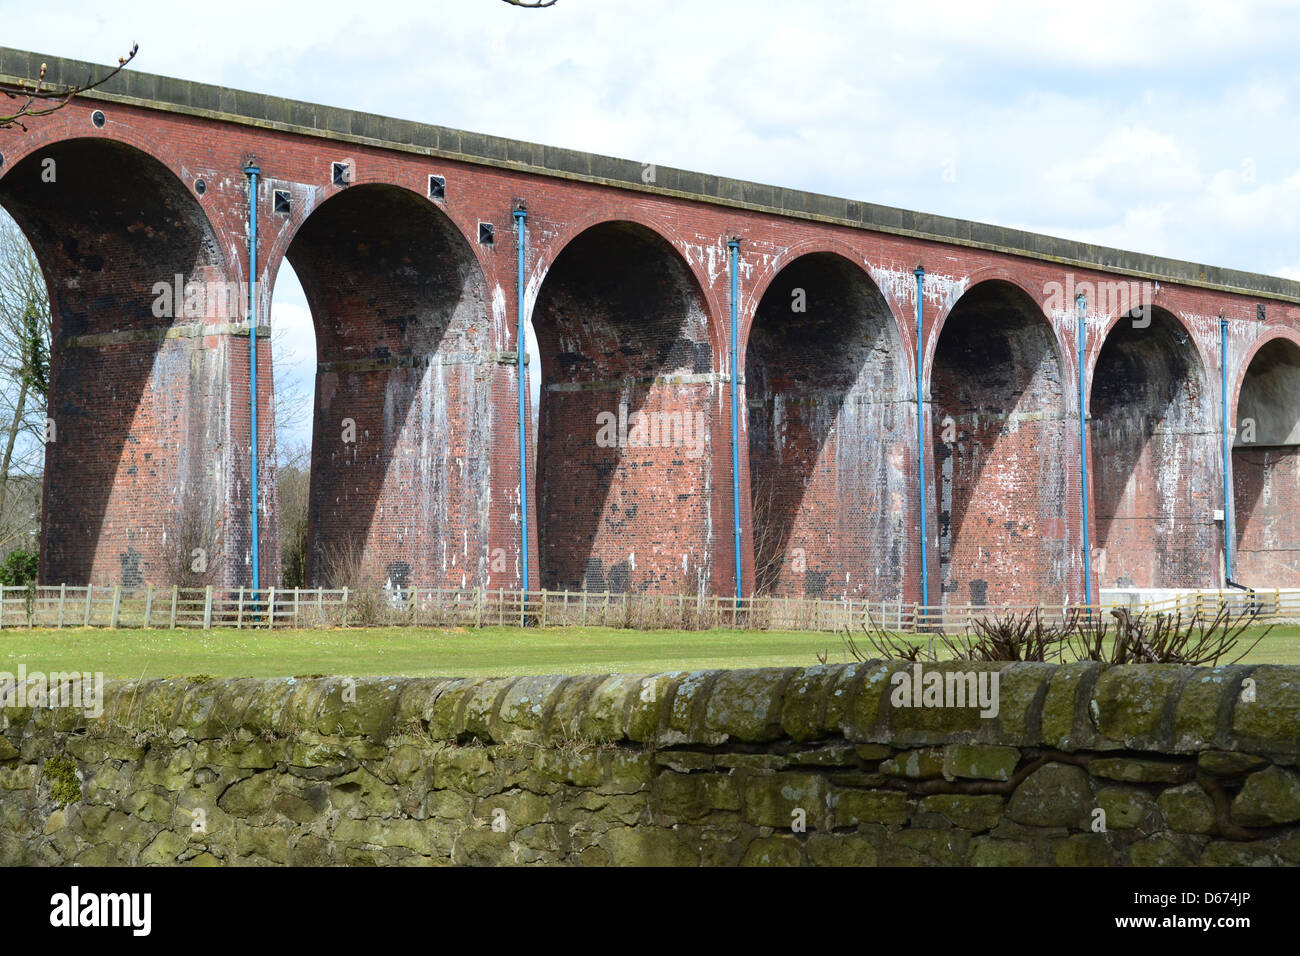 Whalley Viaduct - The longest viaduct in Lancashire, it is unusual for the area in being built of brick. Listed Grade II. Stock Photo